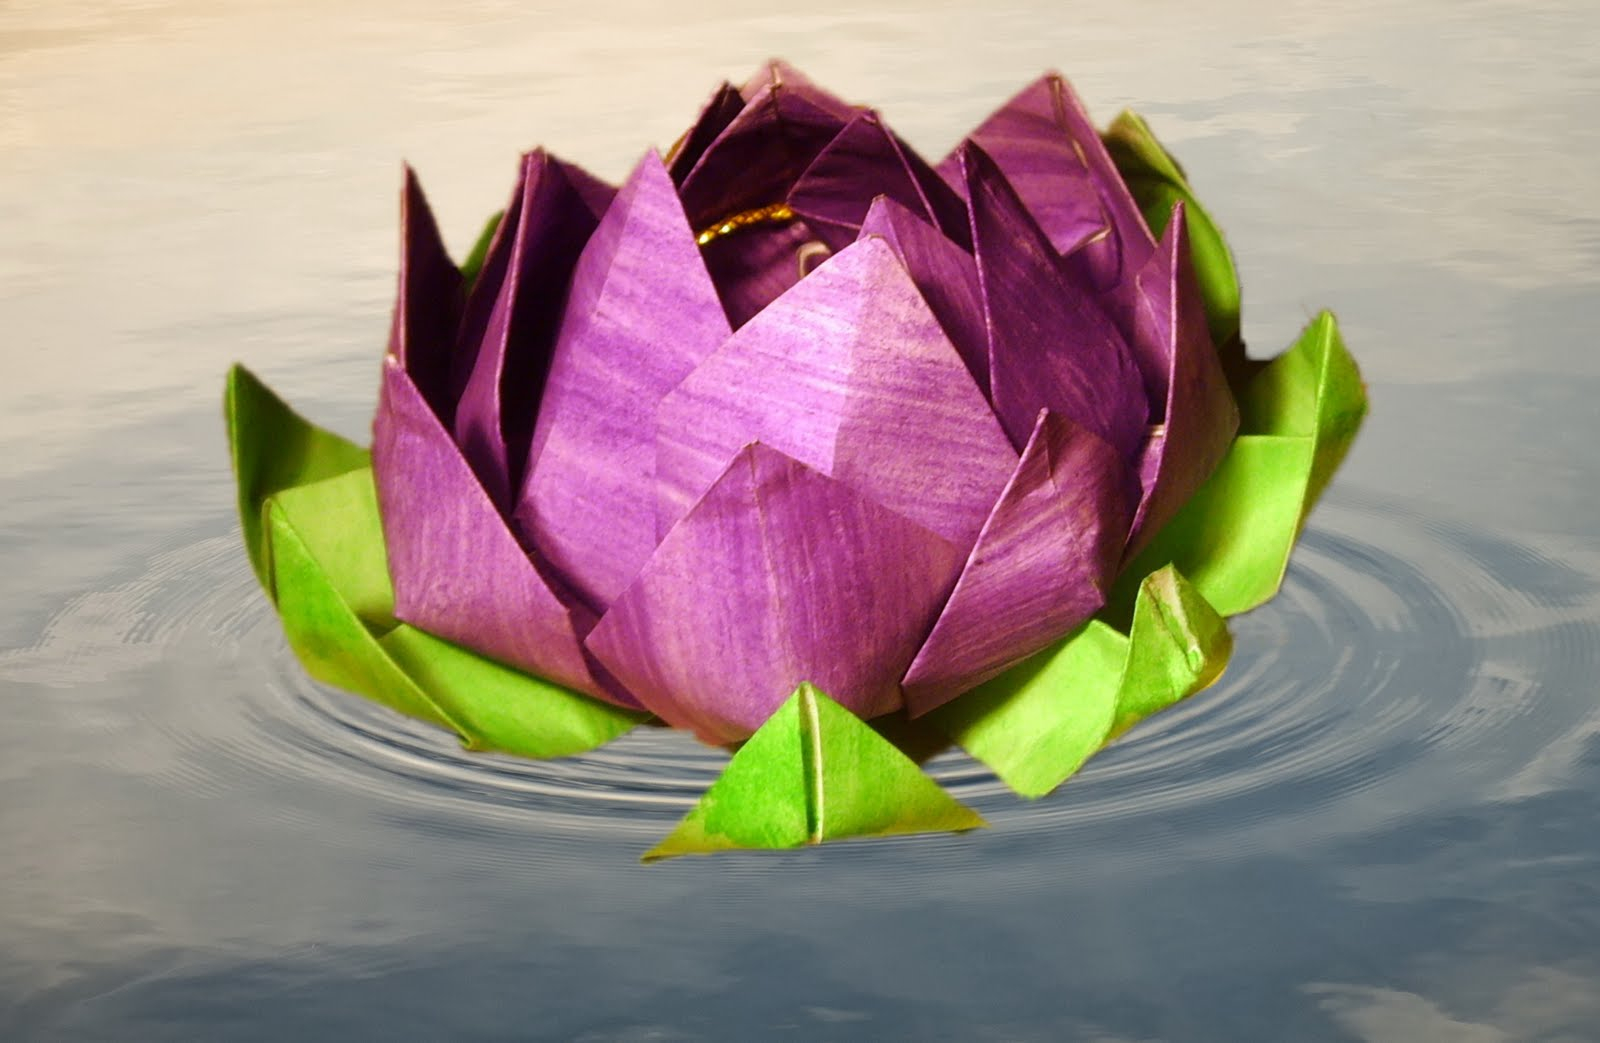 How To Make Origami Lotus Flower Video Origami Lotus Flower Video Tutorial